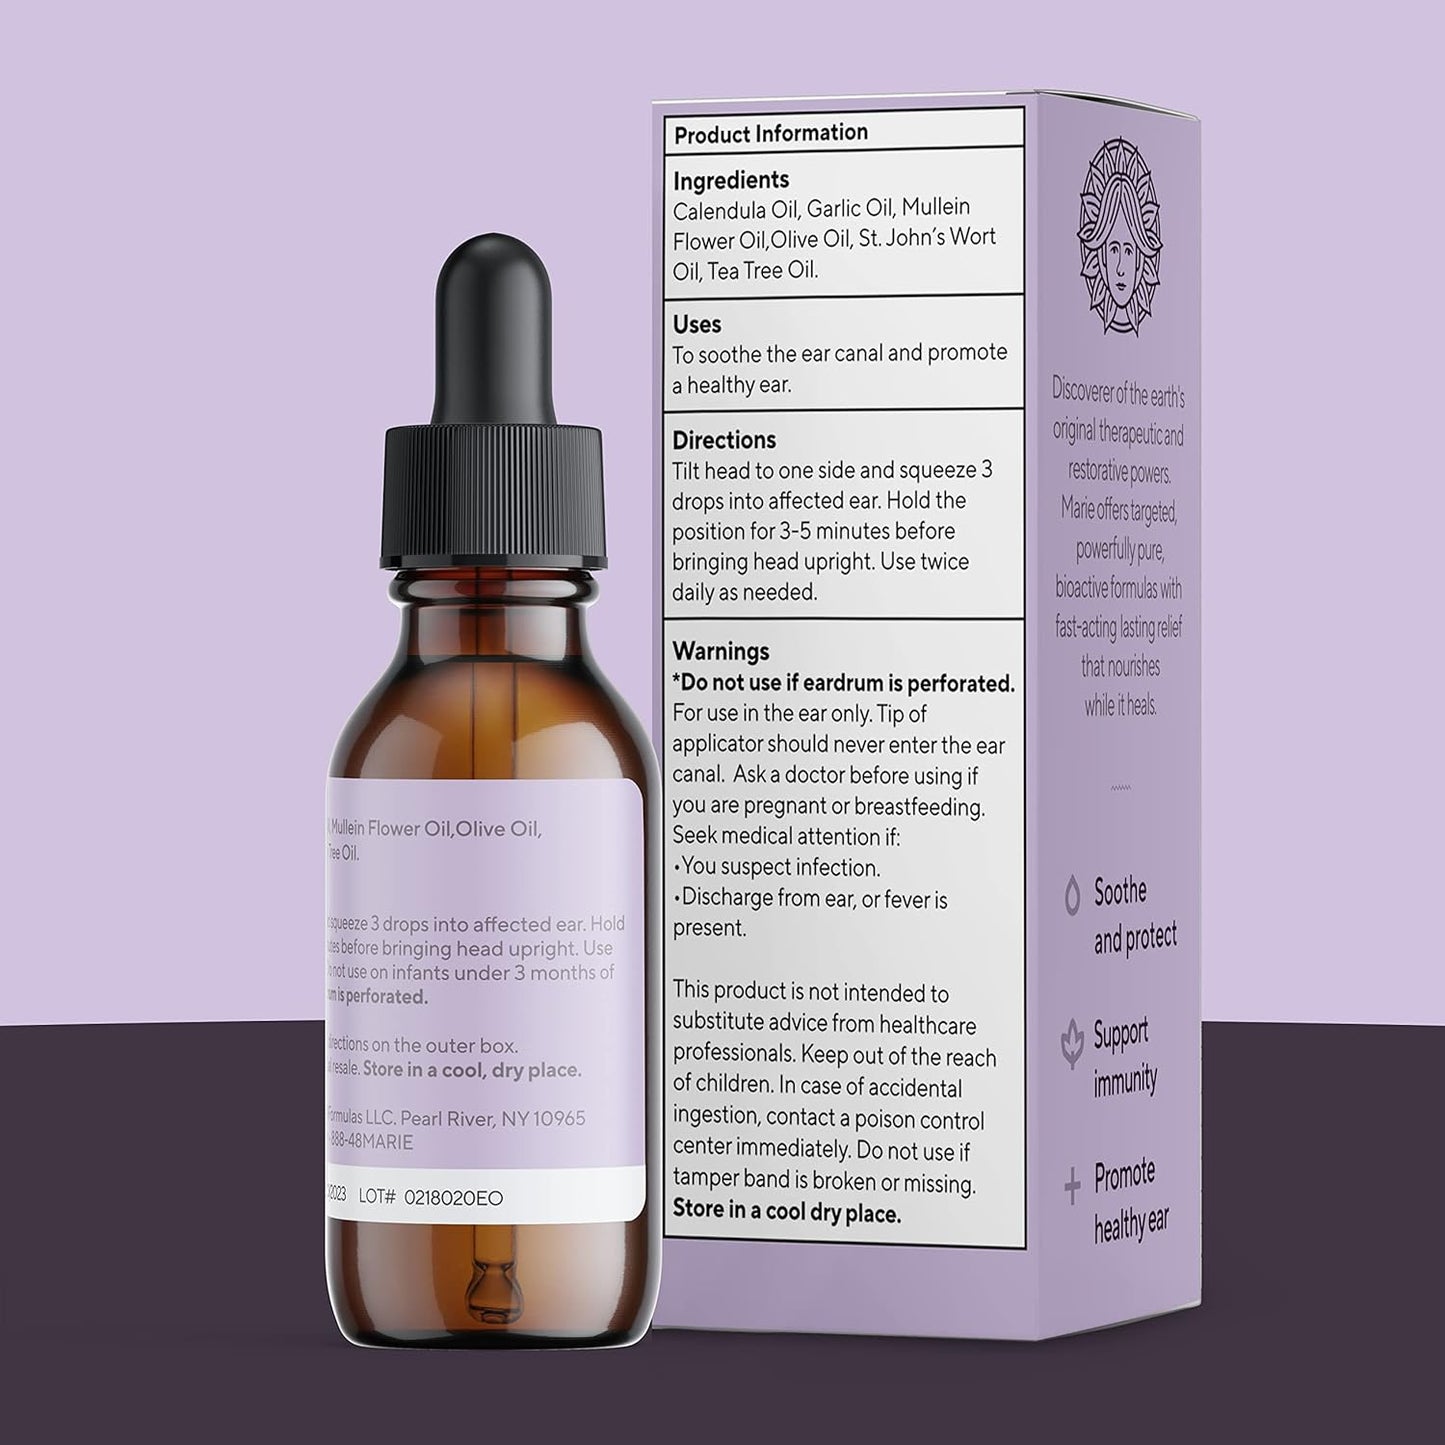 Organic Ear Oil for Earache Irritation, All Natural Eardrops for Infection Prevention, Swimmer's Ear and Wax Removal - Kids, Adults, Baby, Dog Earache Remedy - with Mullein, Garlic | Marie Originals - Premium Organic Ear Oil from Concordia Style Boutique - Just $27.30! Shop now at Concordia Style Boutique